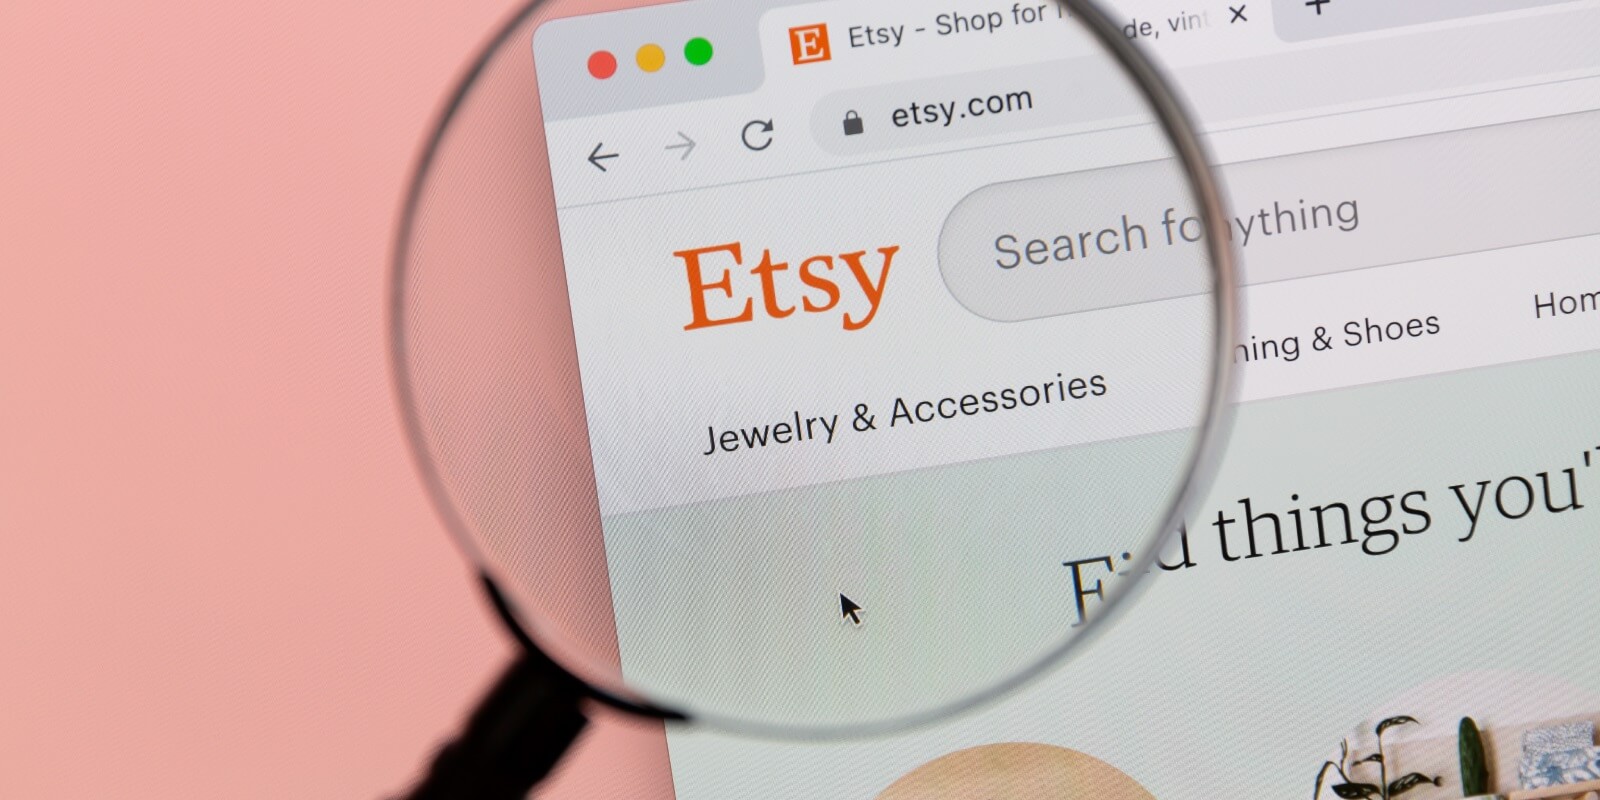 How to Sell Digital Products on Etsy